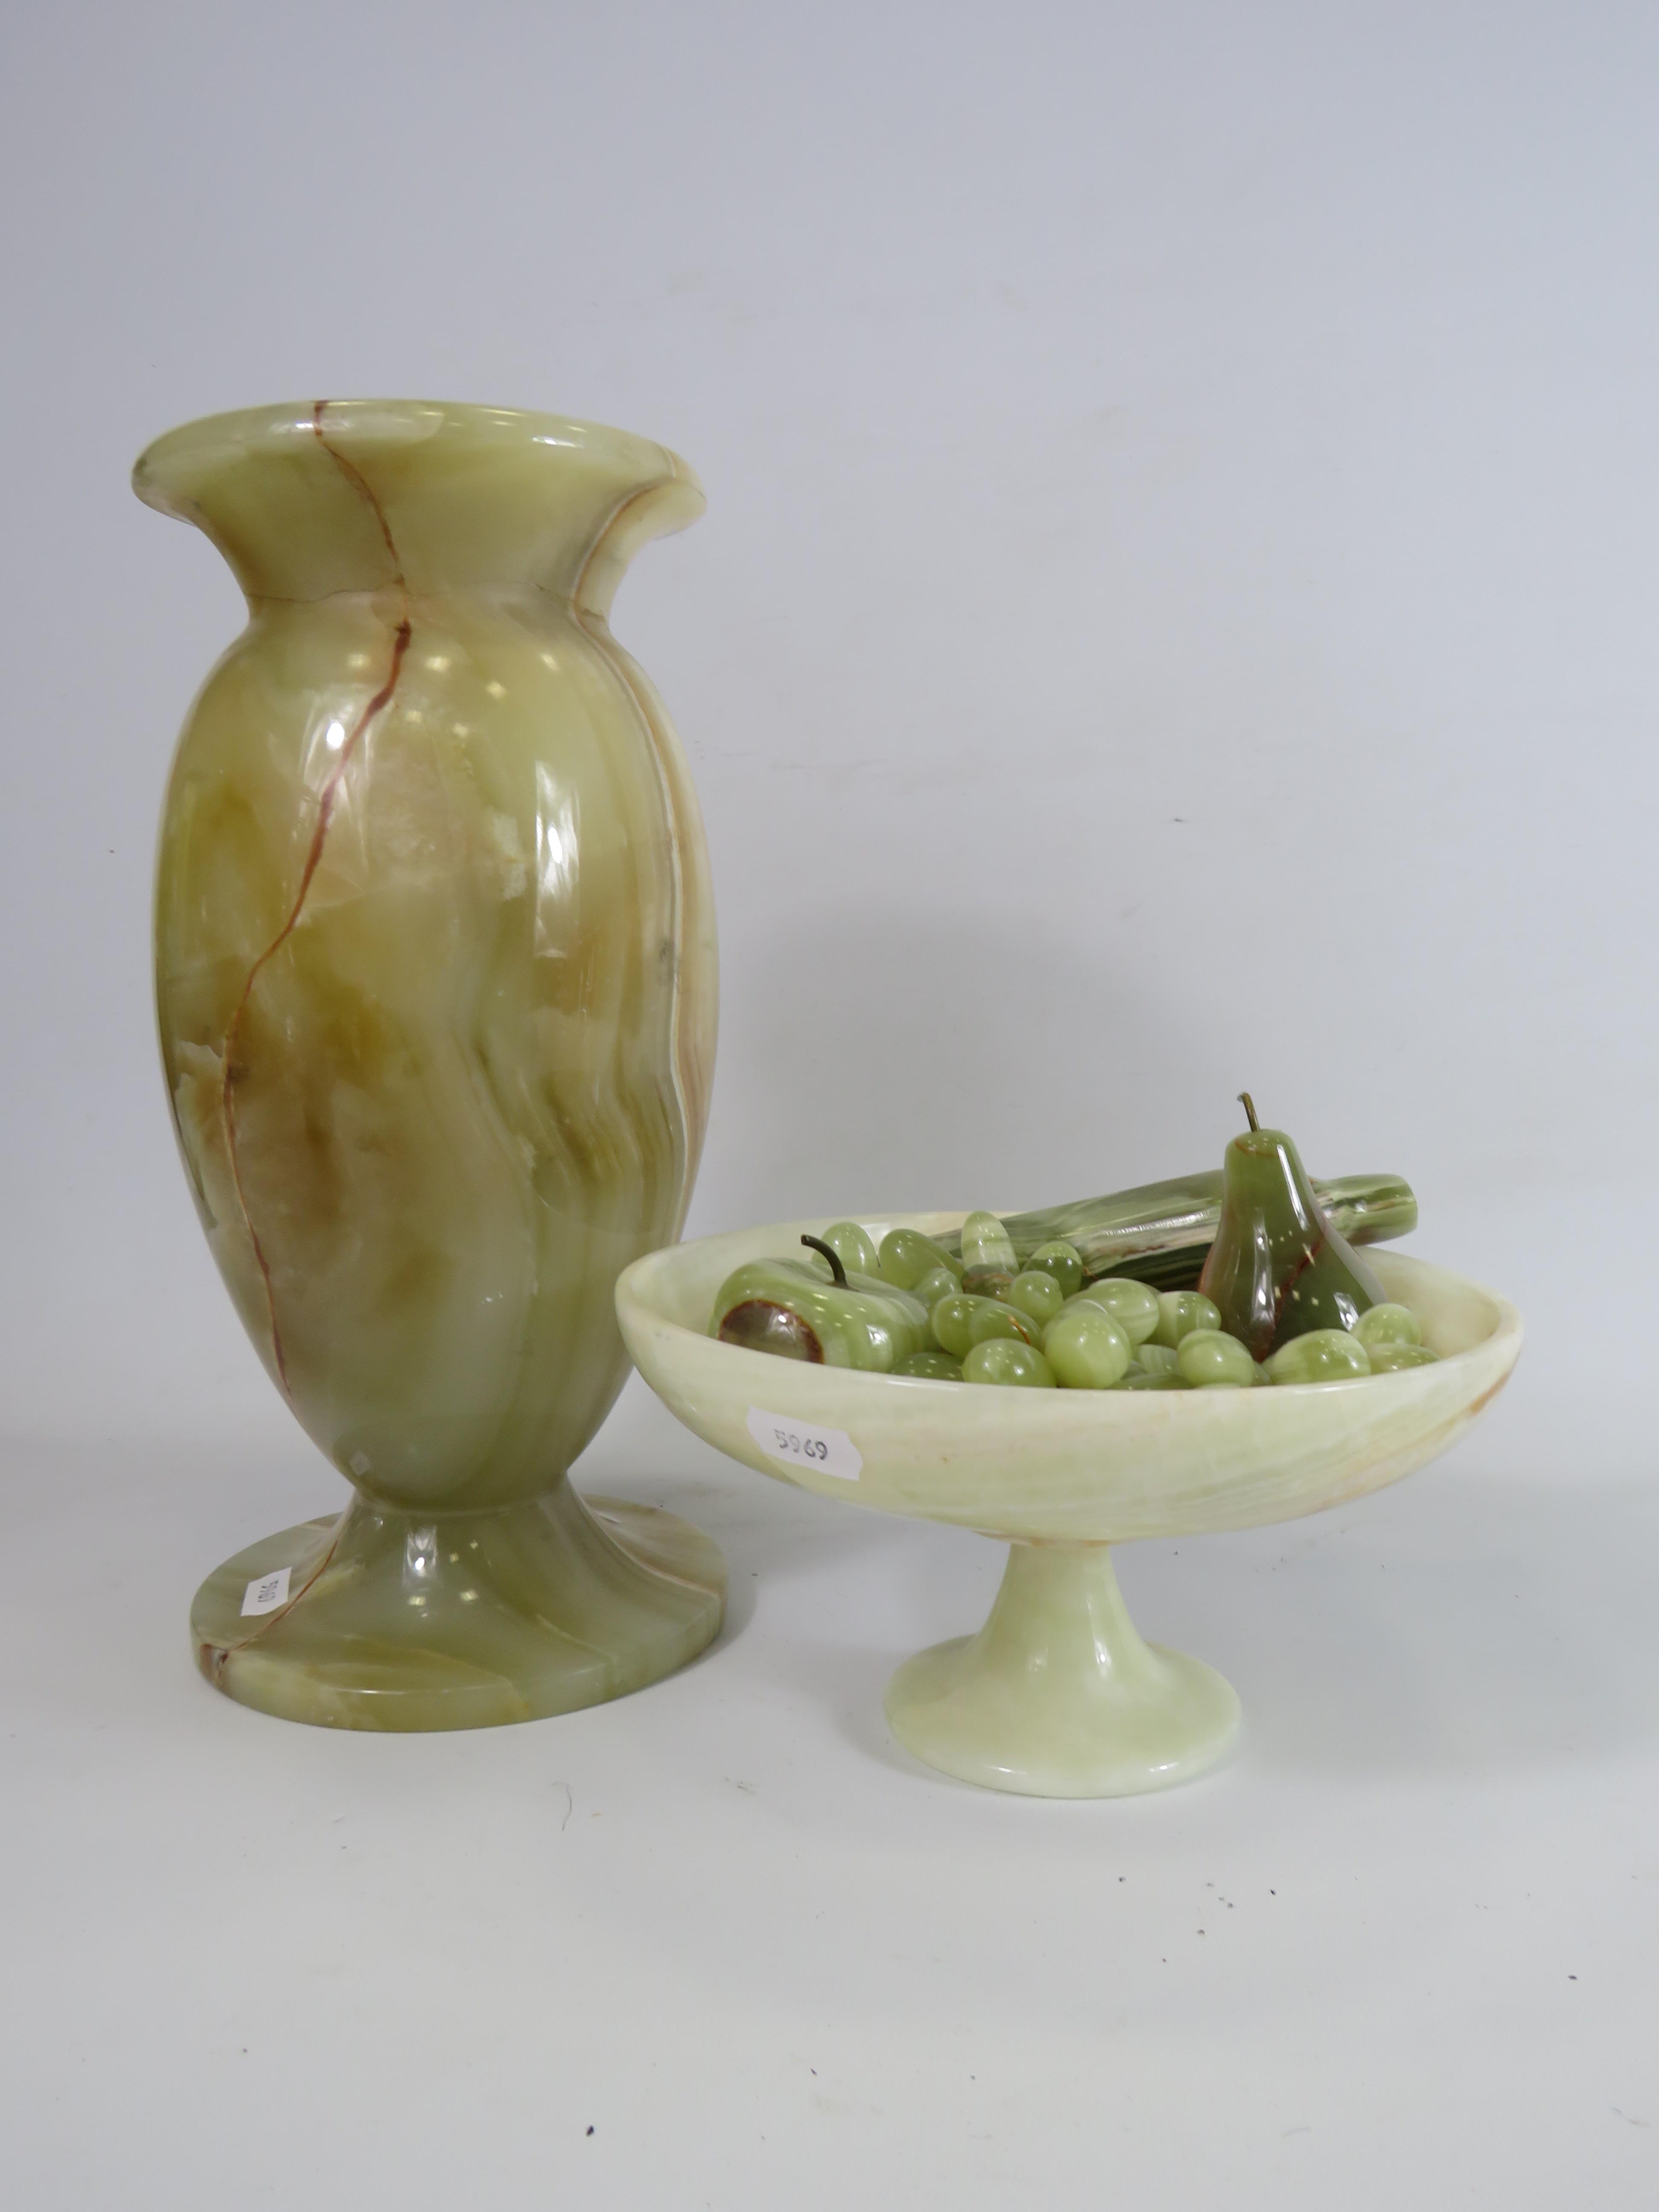 Large onyx vase and a pedastal bowl with a selection of fruit. - Image 3 of 3